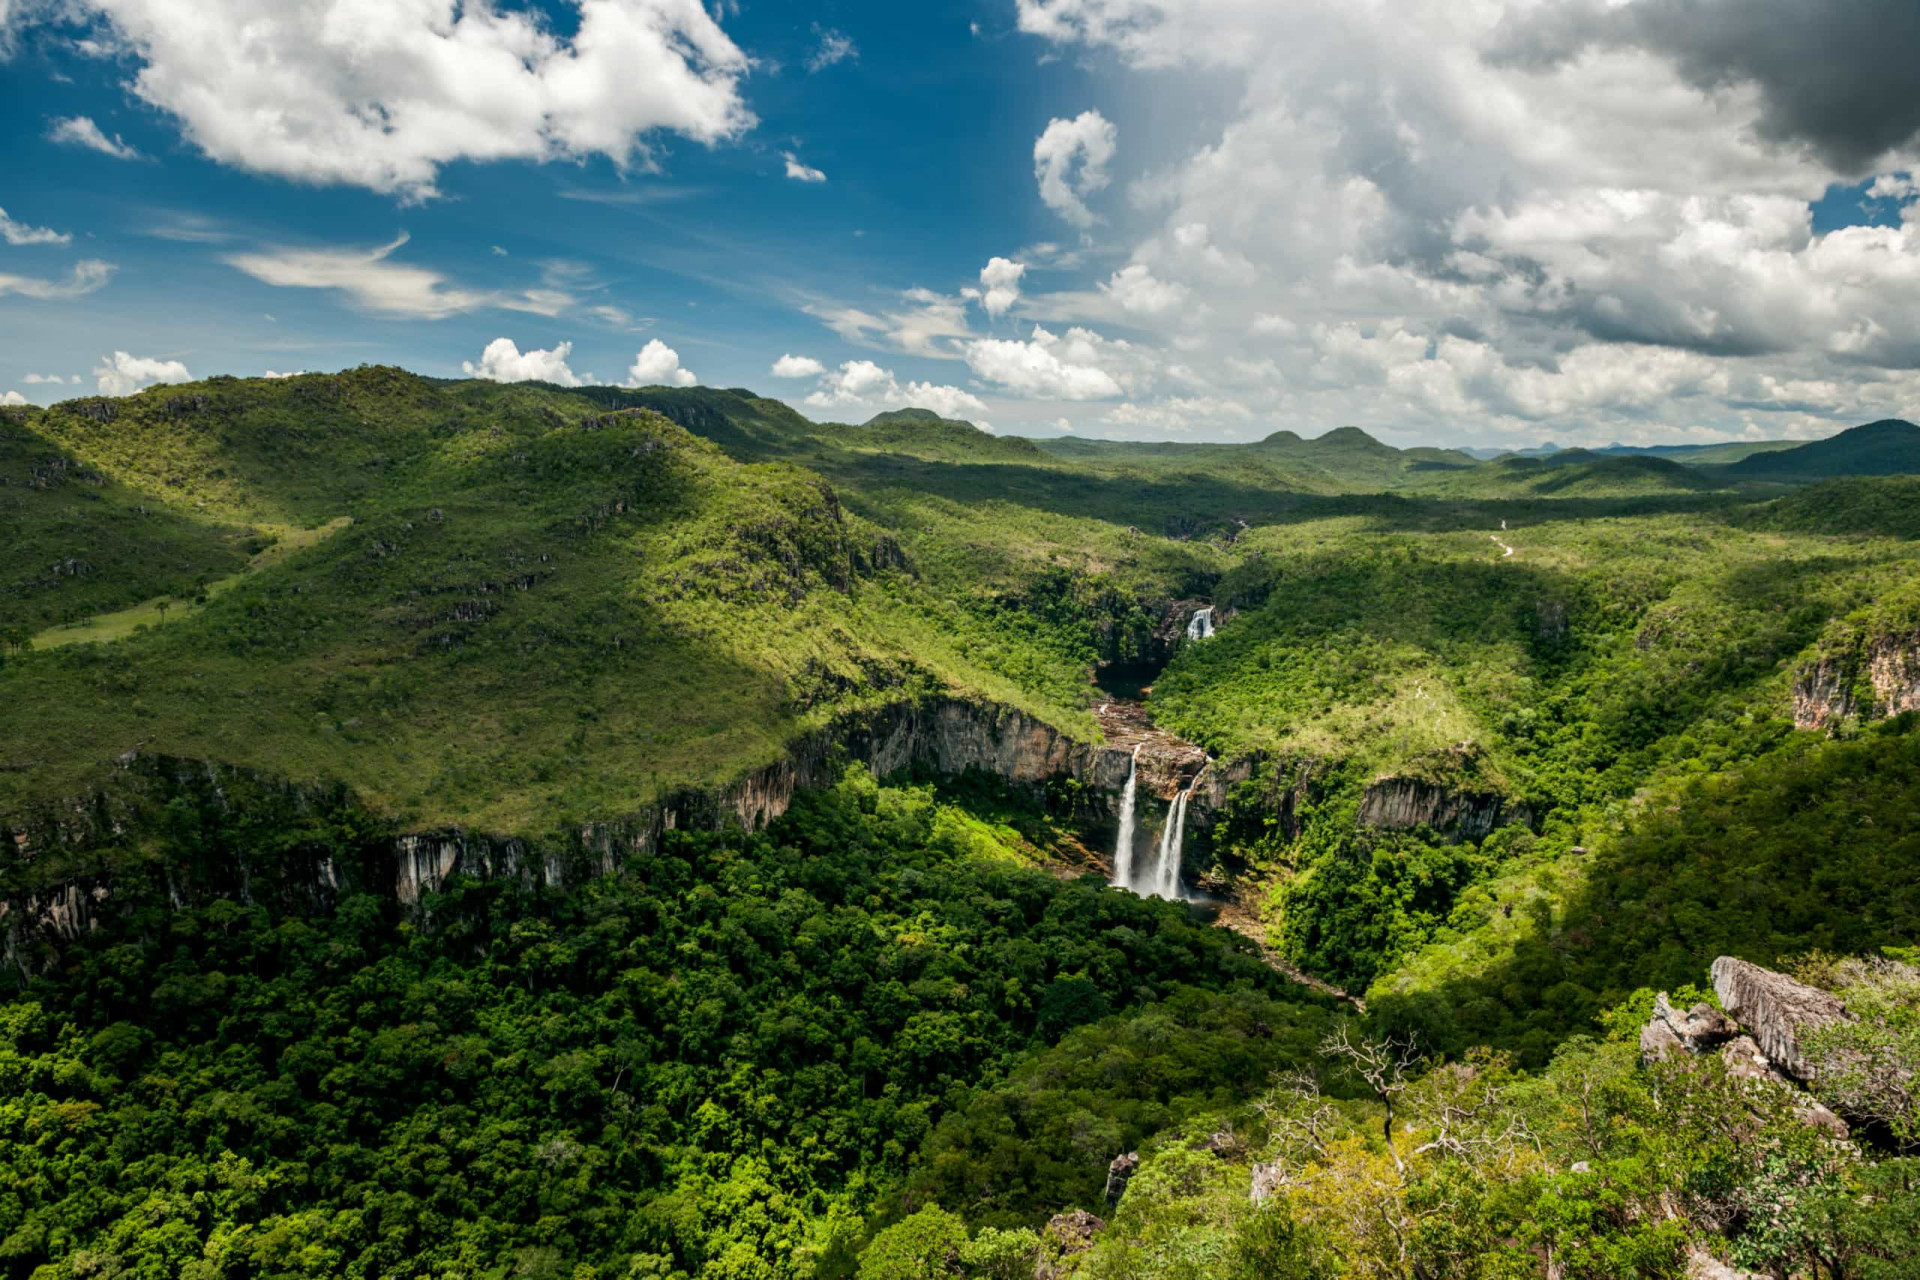 <p>Location: Central Brazil Plateau<br>Criteria: Natural<br>Year established: 2001<br>Description: Chapada dos Veadeiros and Emas national parks, located in the country's Goiás state, exemplify the cerrado, one of the world's oldest ecosystems and an important refuge for species during climate change.</p><p><a href="https://www.msn.com/en-us/community/channel/vid-7xx8mnucu55yw63we9va2gwr7uihbxwc68fxqp25x6tg4ftibpra?cvid=94631541bc0f4f89bfd59158d696ad7e">Follow us and access great exclusive content every day</a></p>